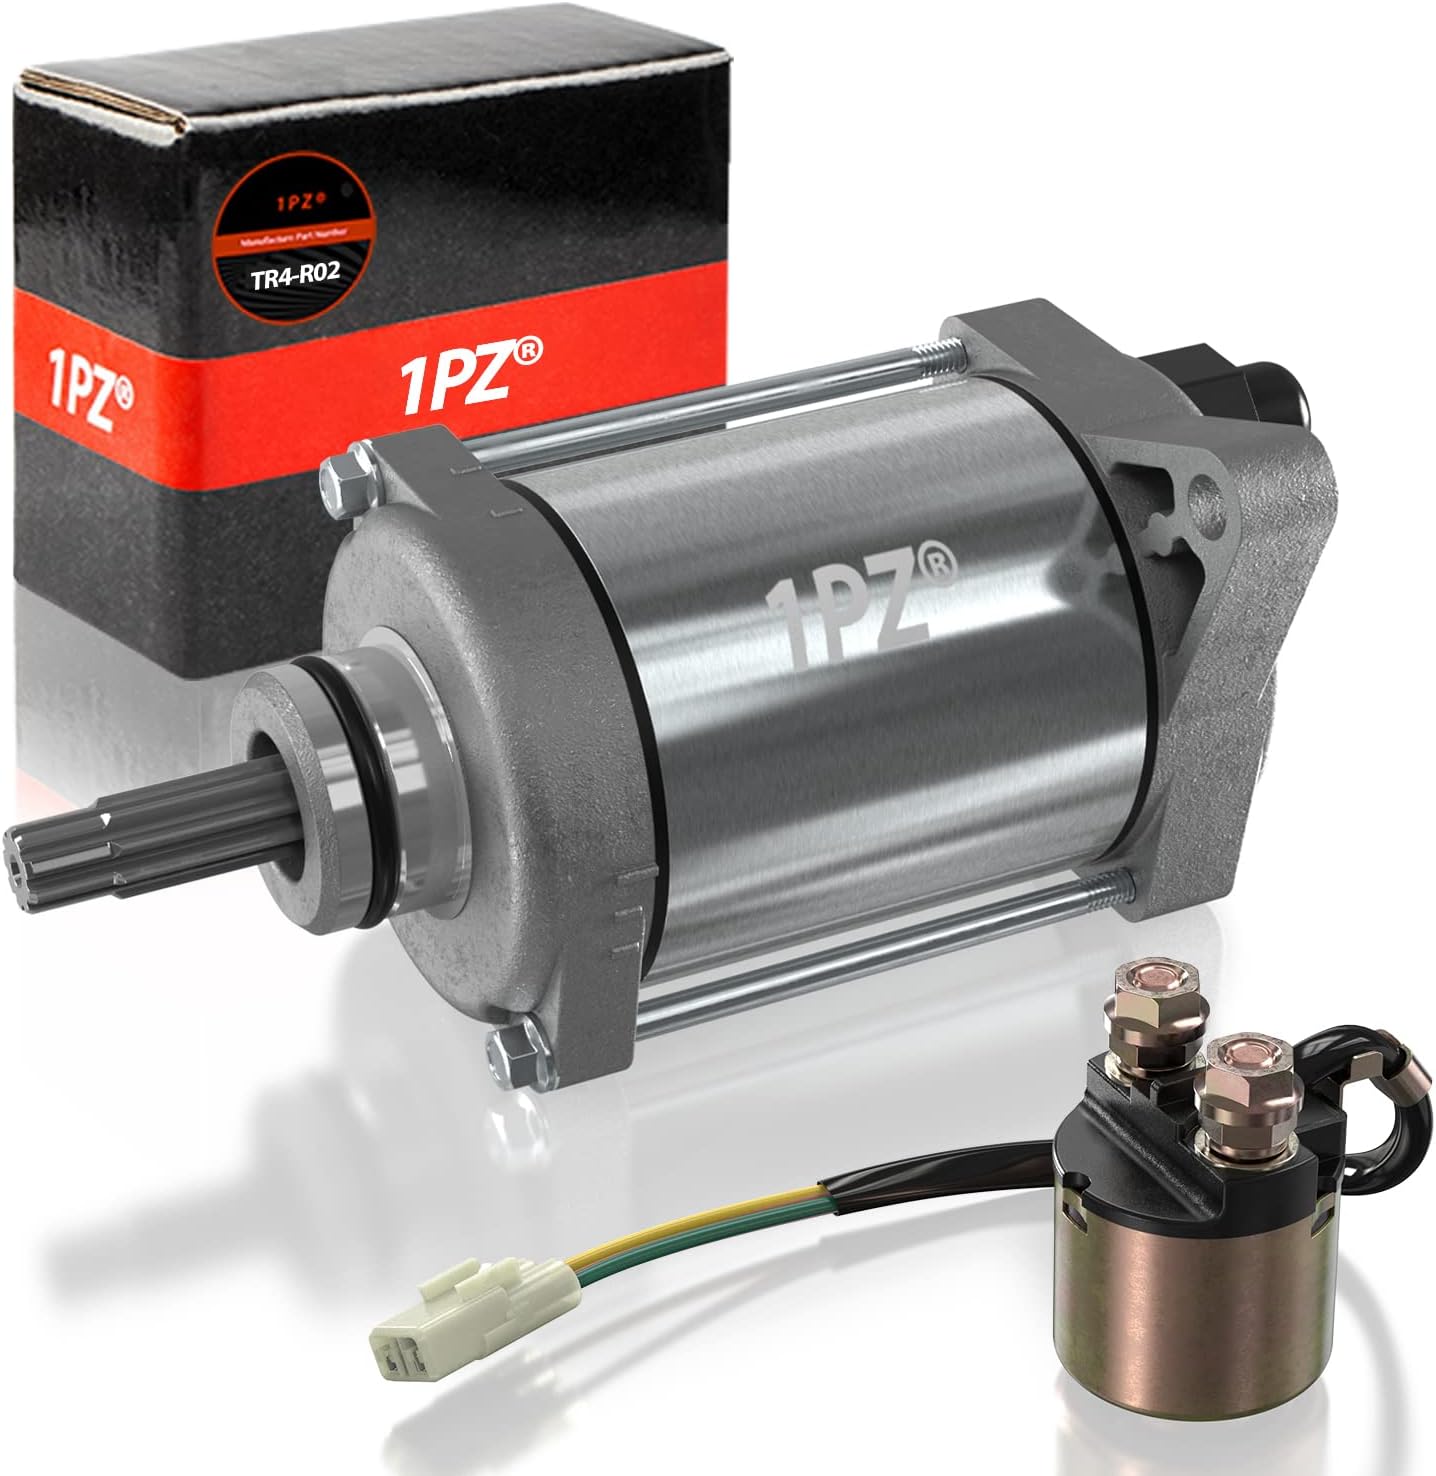 1PZ TR4-R02 Starter Motor with Relay Solenoid Replacement for Honda Rancher 420 TRX420 FE FM TE TM FA Foreman 500 TRX500 FE FM Pioneer 500 SXS500M2 31200-HP5-601 35850-HP5-600